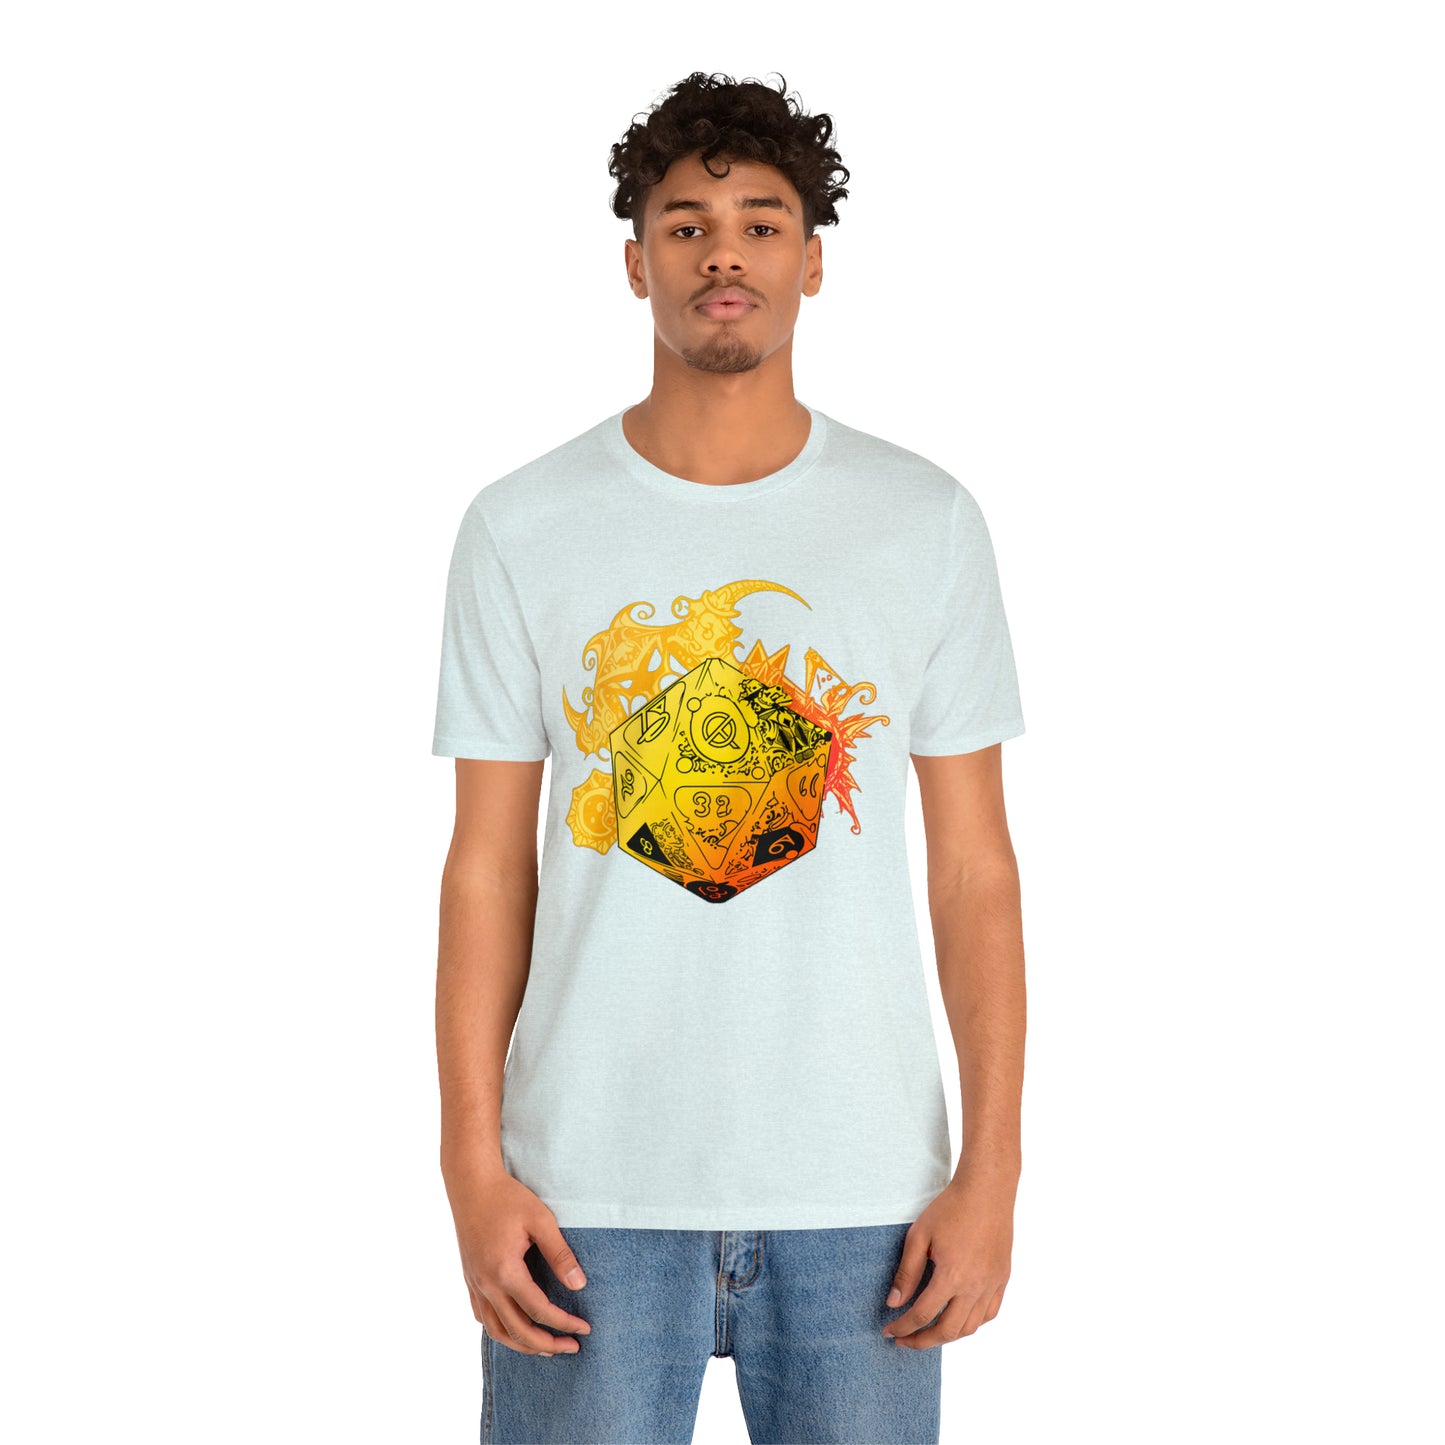 heather-ice-blue-quest-thread-tee-shirt-with-large-yellow-dragon-dice-on-center-of-shirt